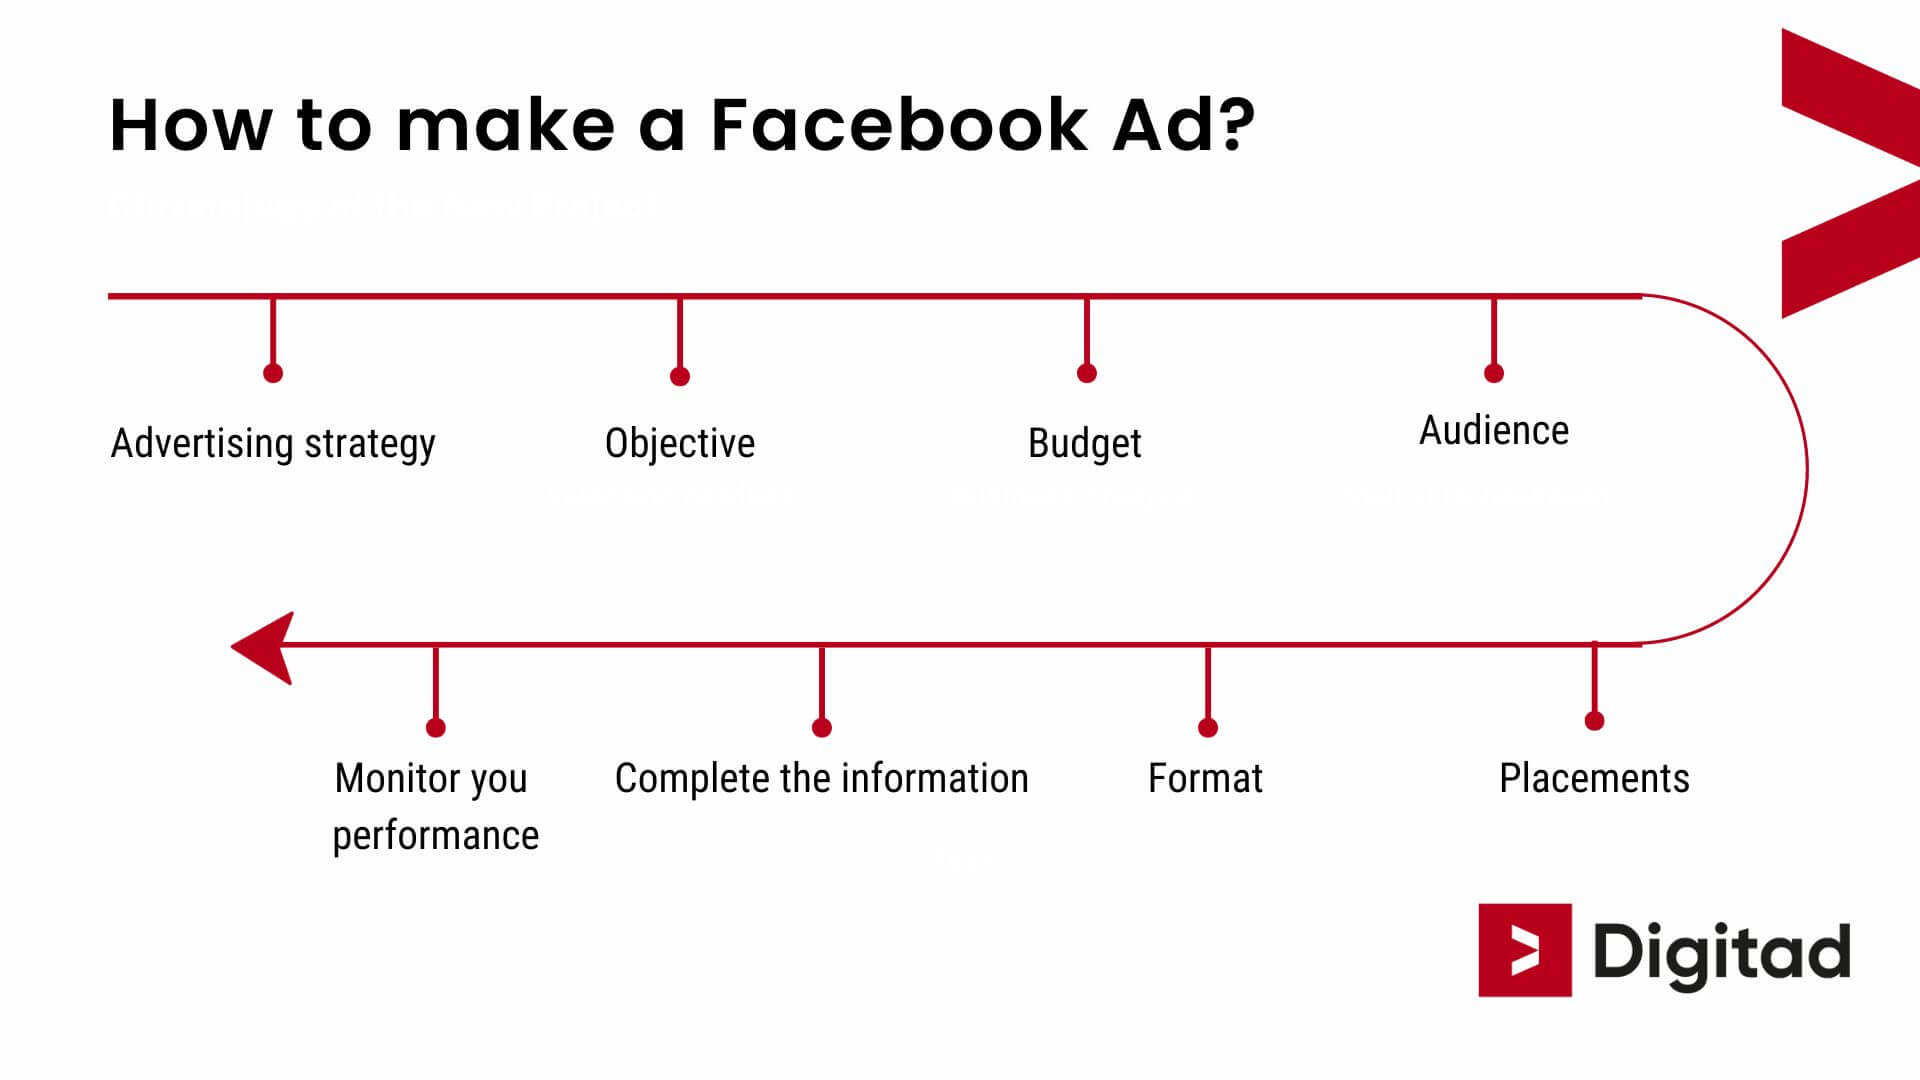 How to make a Facebook Ad